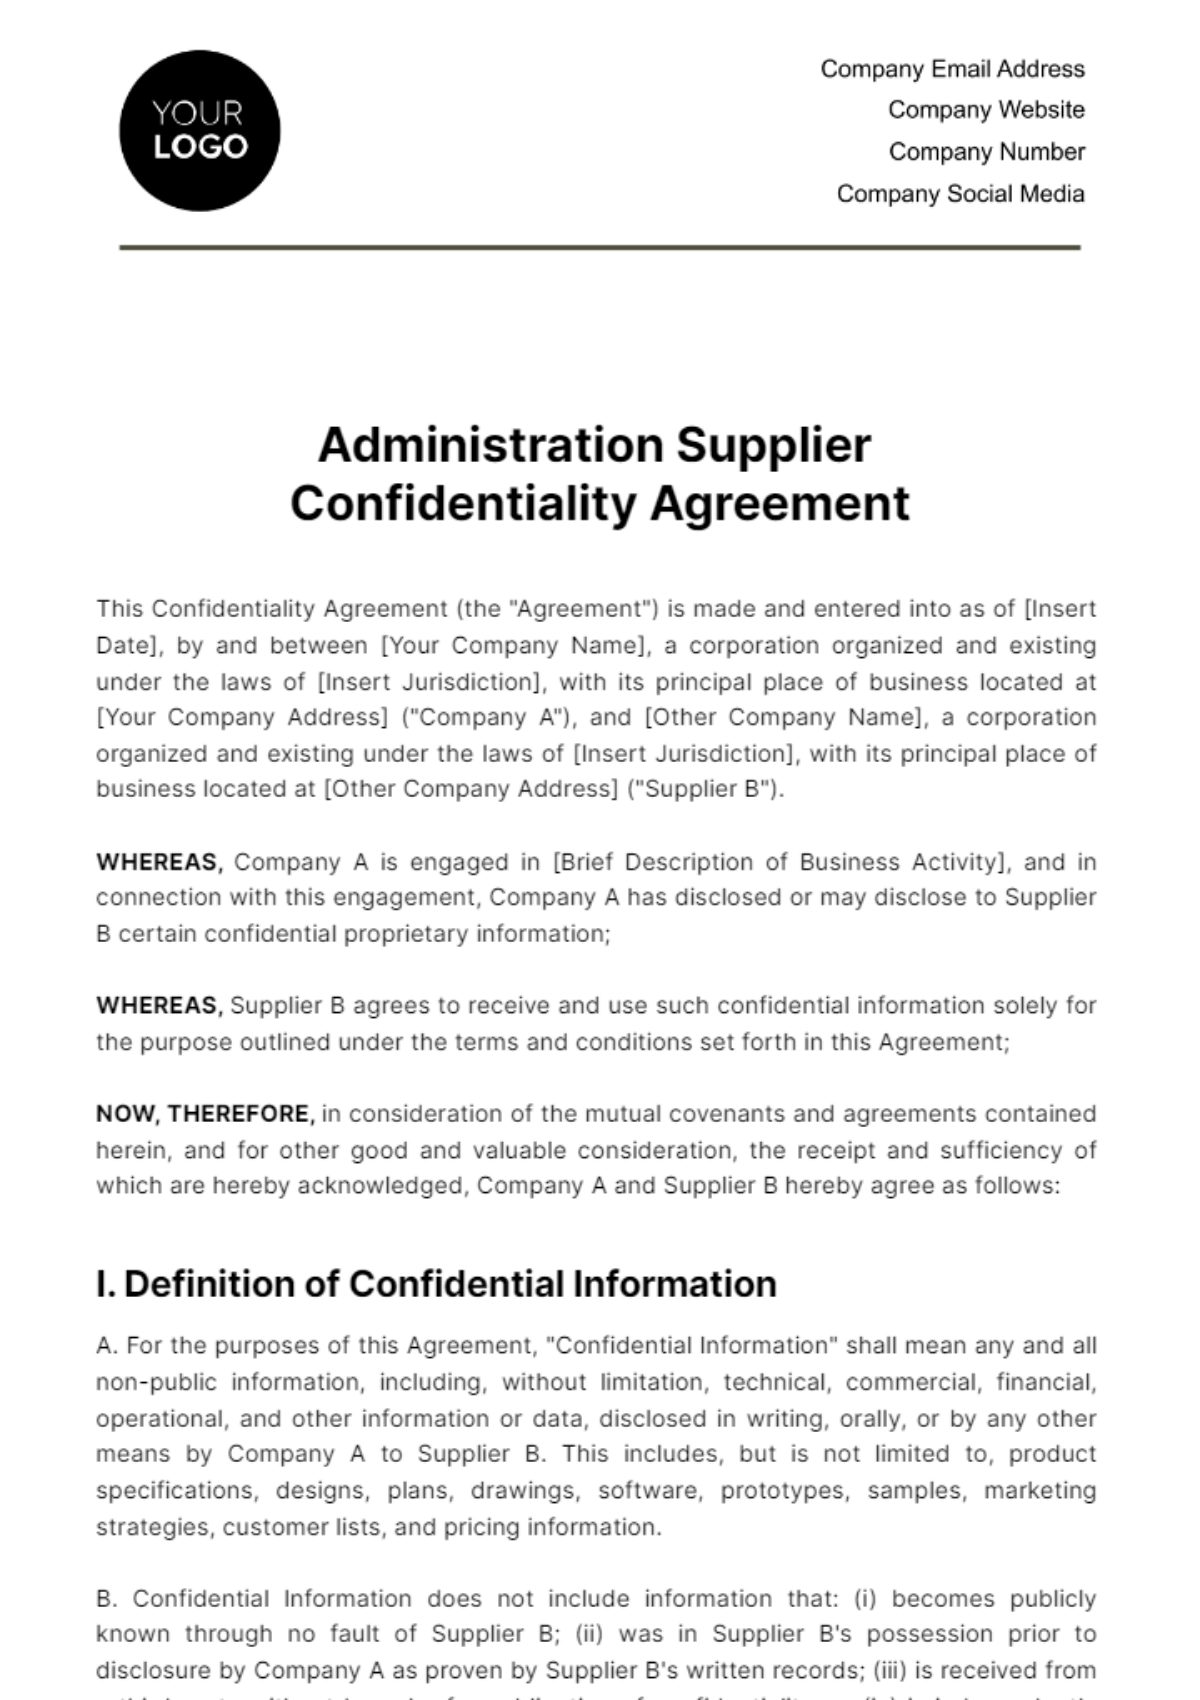 Administration Supplier Confidentiality Agreement Template